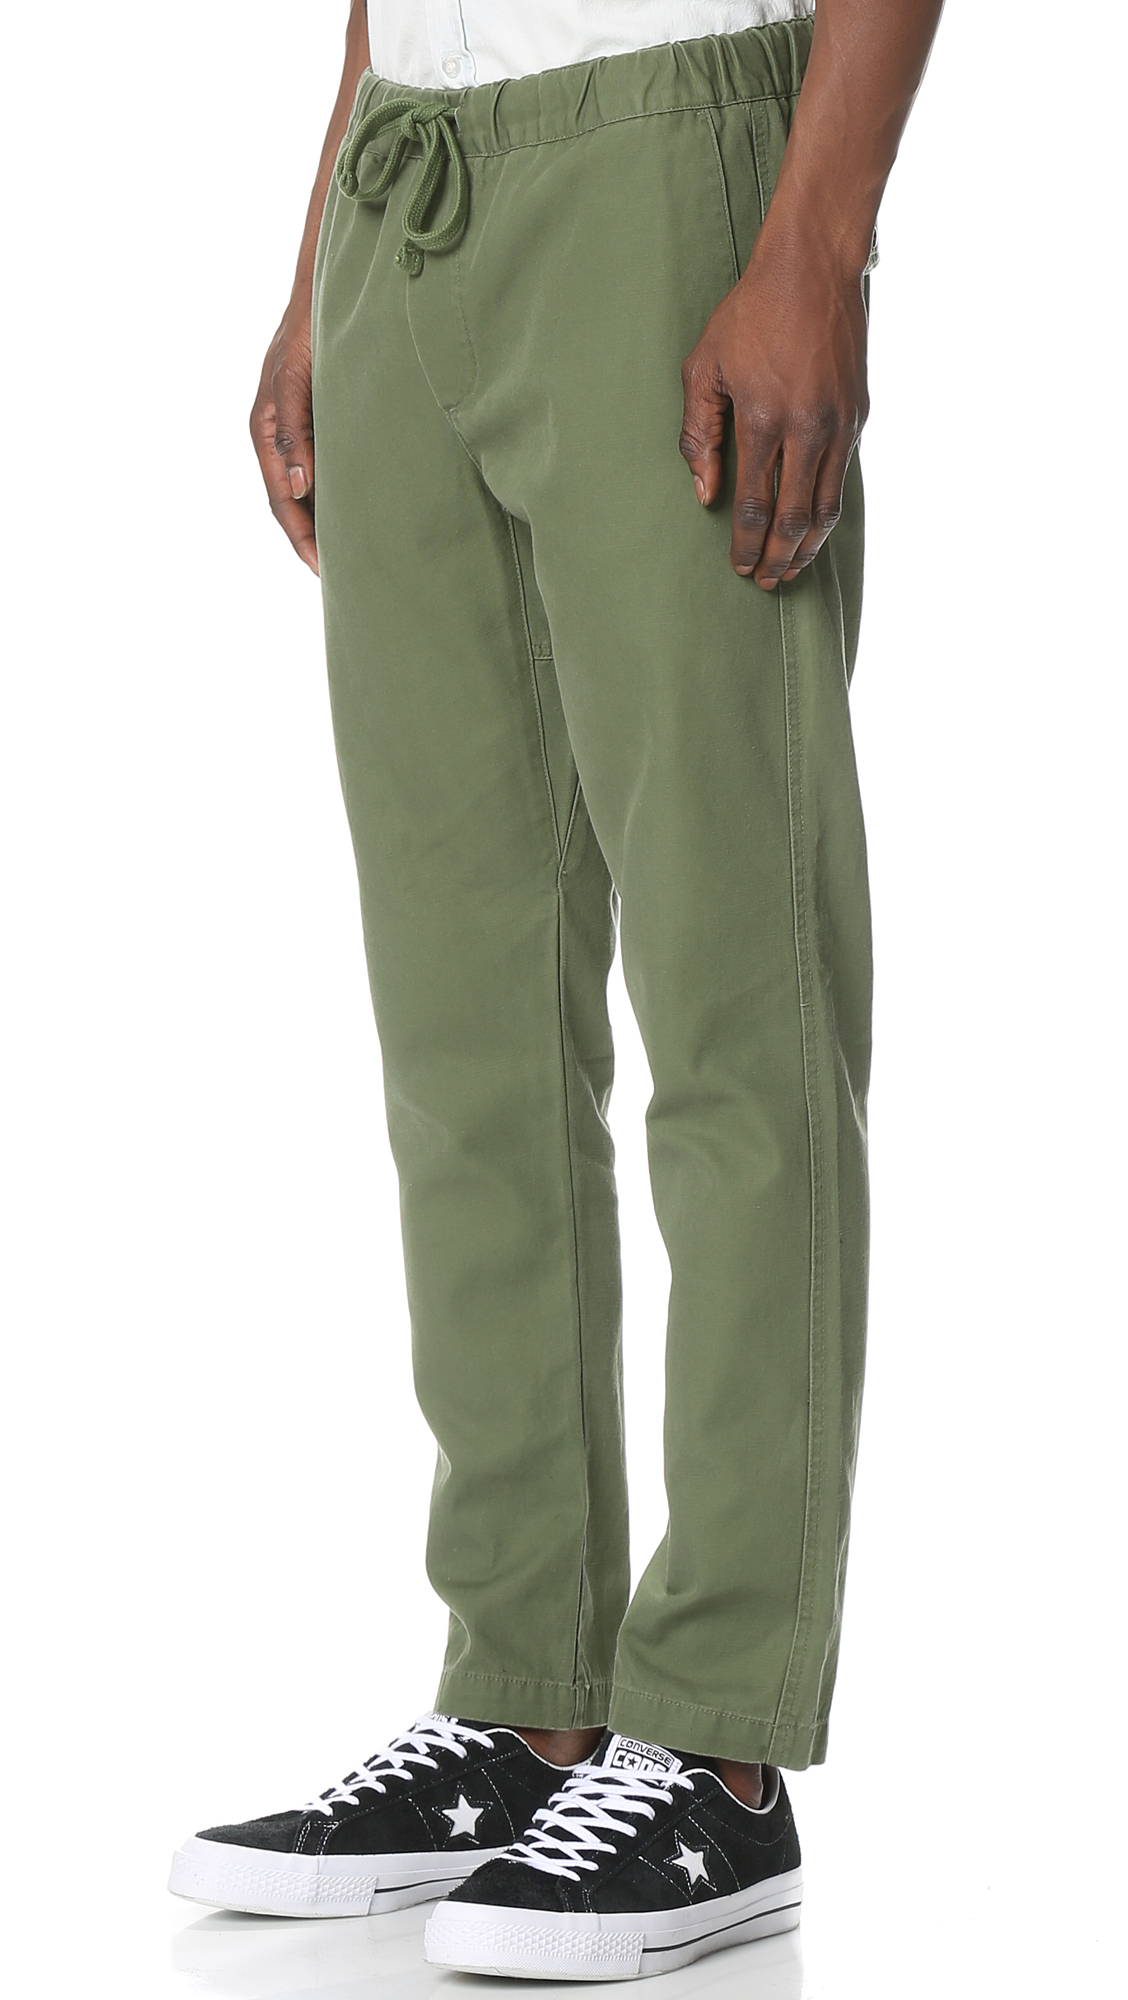 Obey Canvas One O Traveler Pants in Army (Green) for Men - Lyst